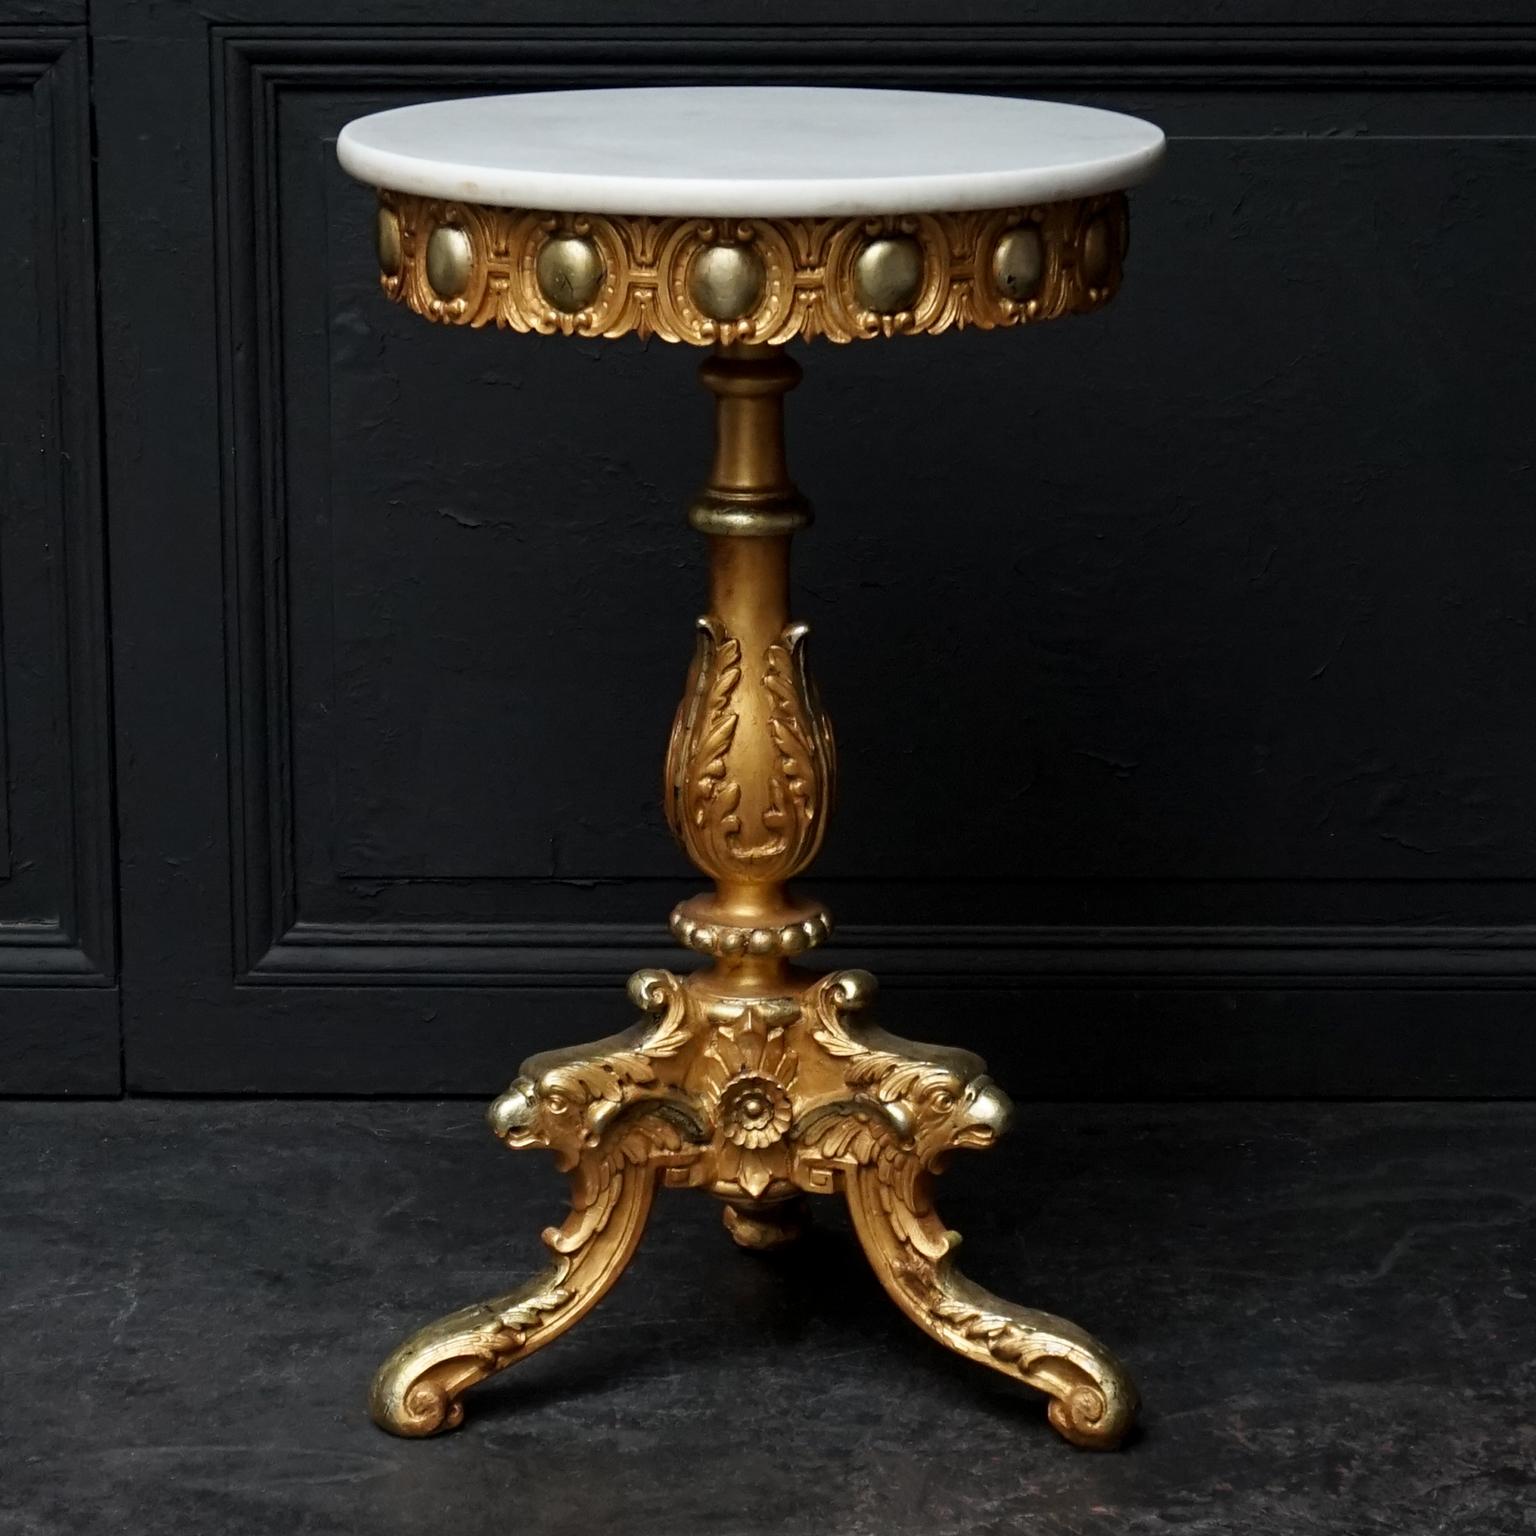 Mid-20th century Italian end or side table with round white marble-top and carved giltwood leg, ending in three legs adorned with carved and gilded eagle heads.

The leg is plaster on carved wood, two-tone gilt, with gold paint and with gold